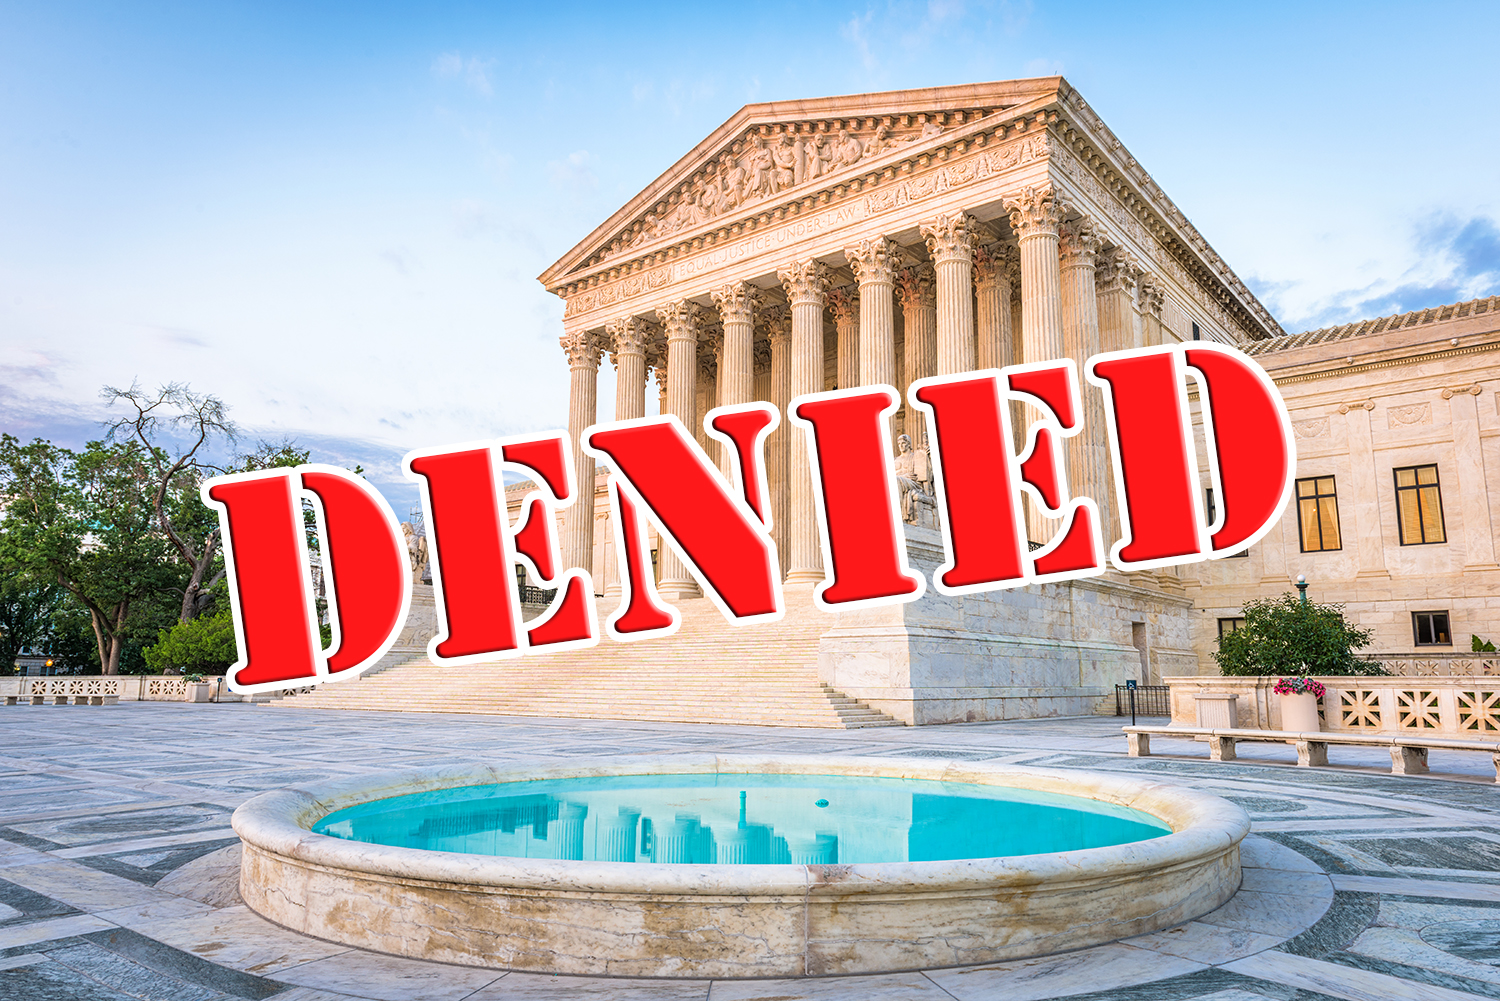 MyPatriotsNetwork-Supreme Court Refuses to Review Pennsylvania Election Cases – Only 3 Justices Dissent